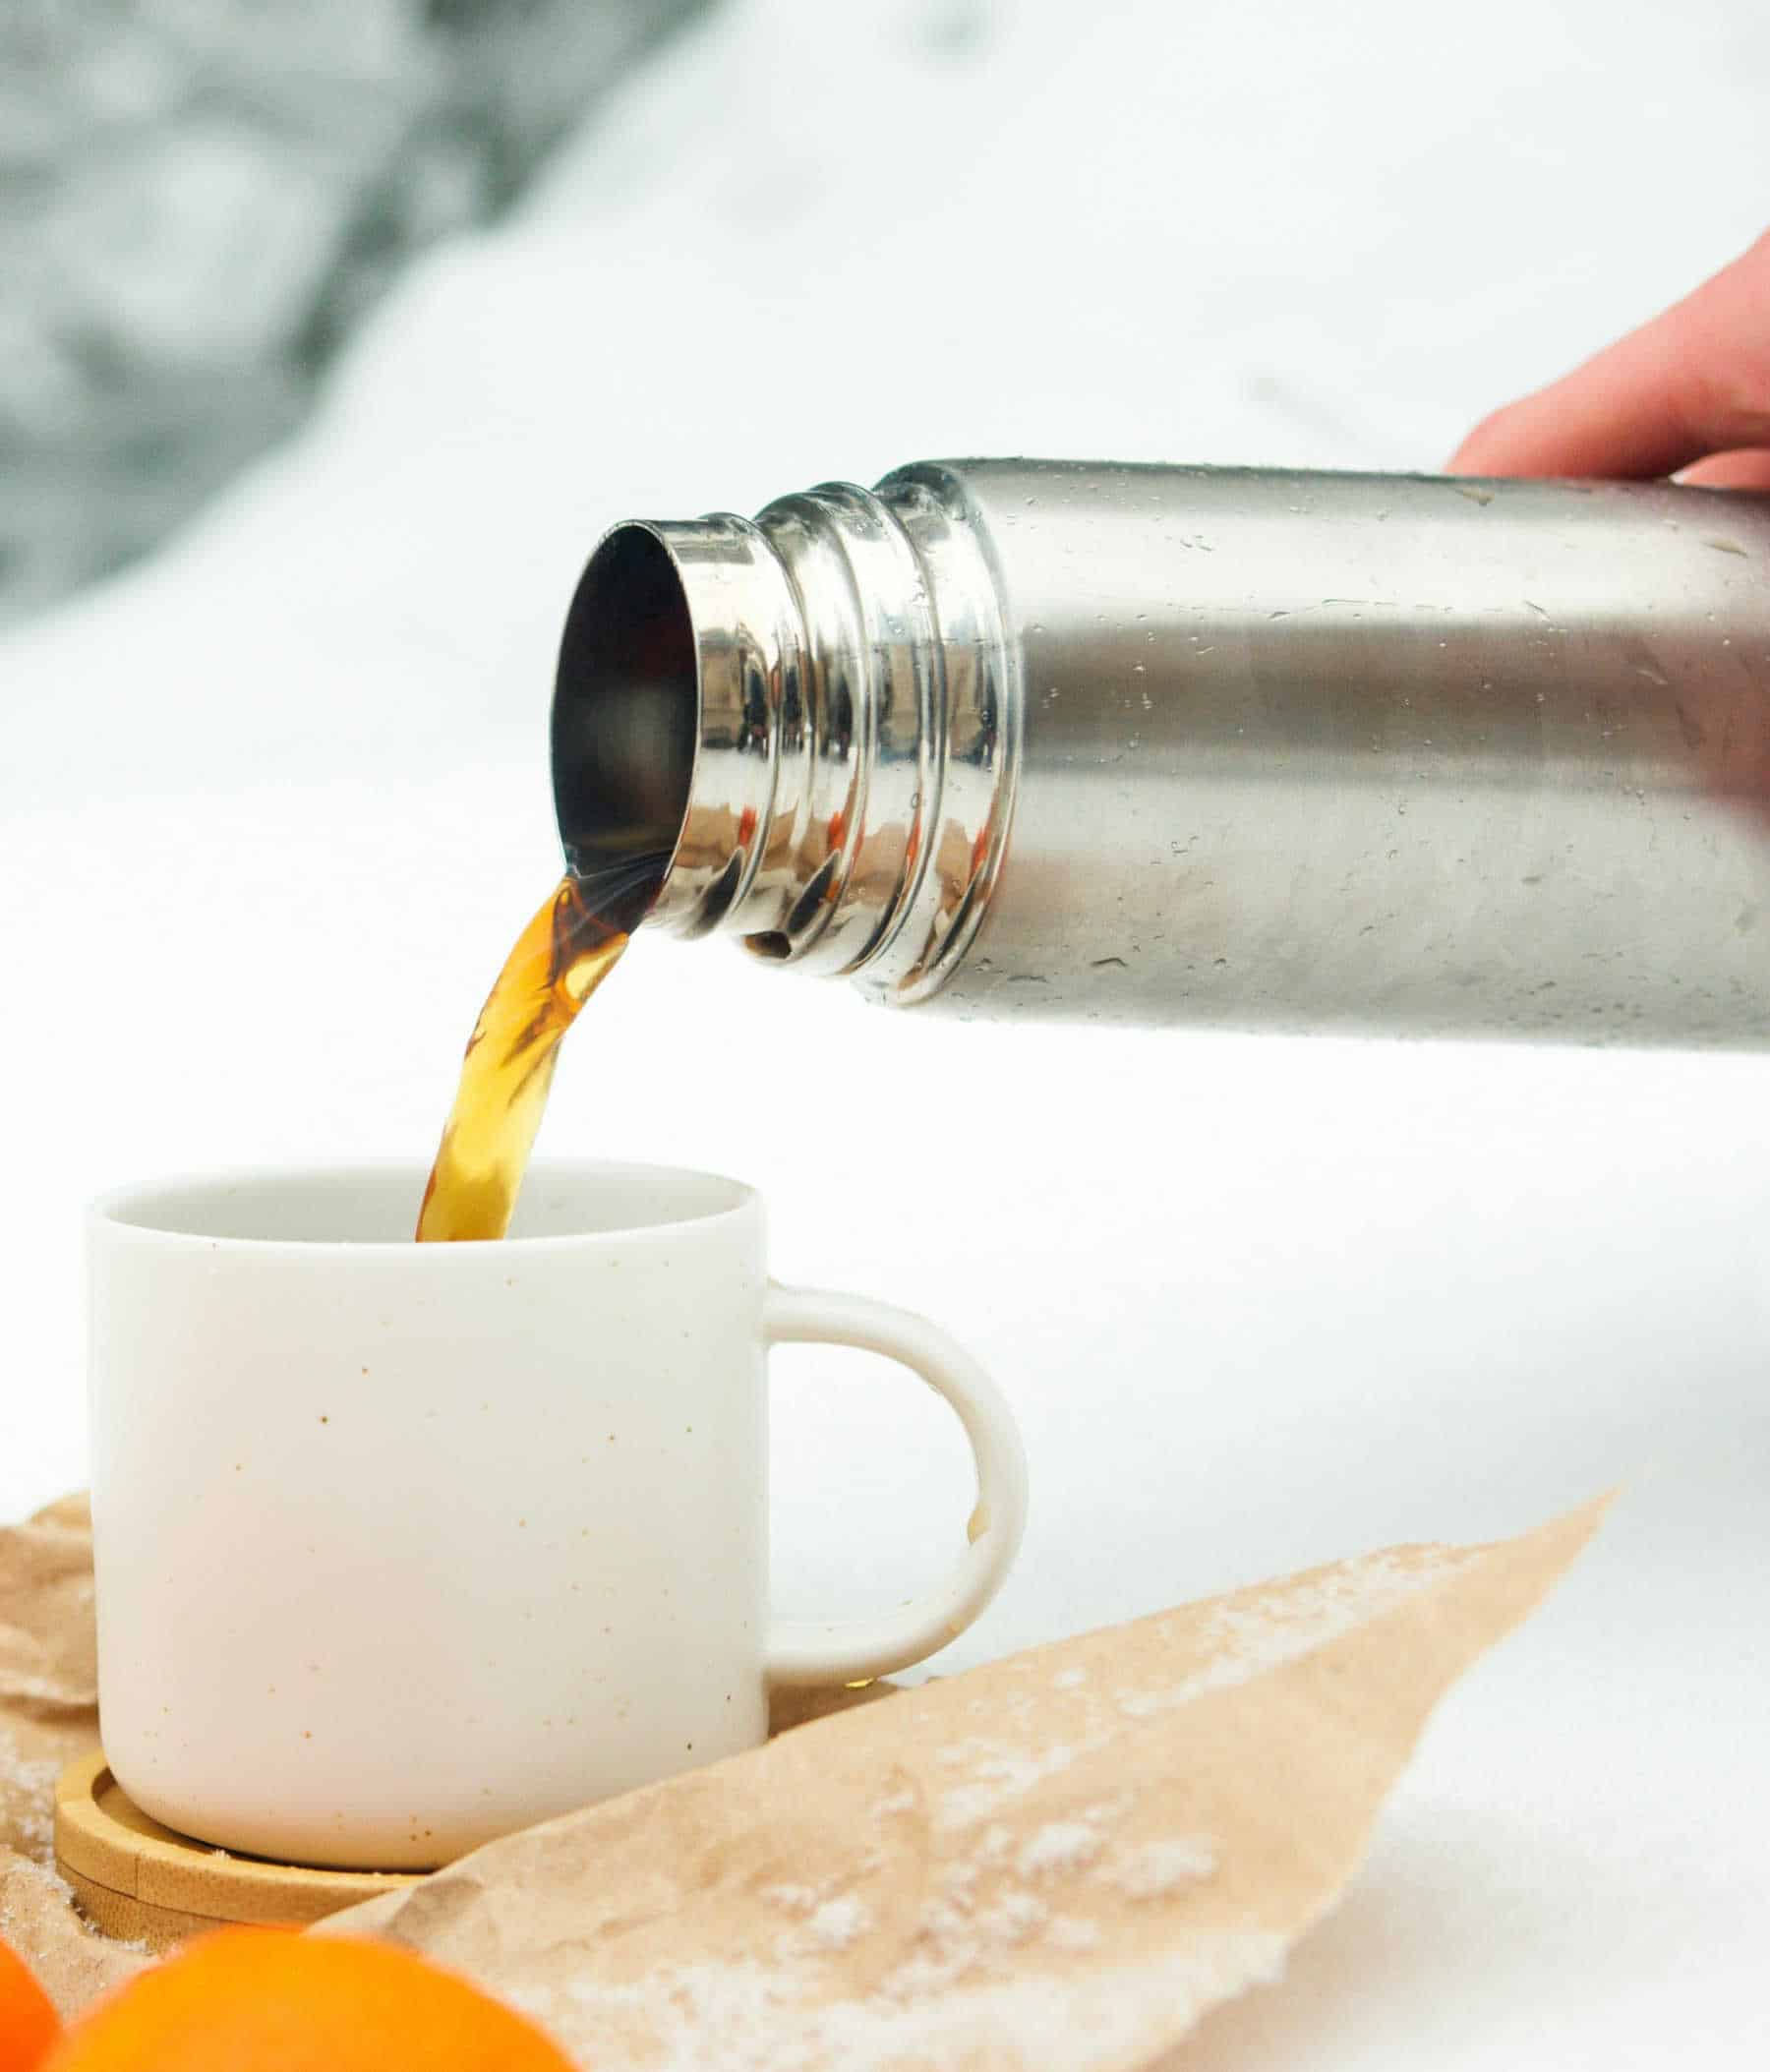 Thermos pouring hot tea into a white cup against a white background